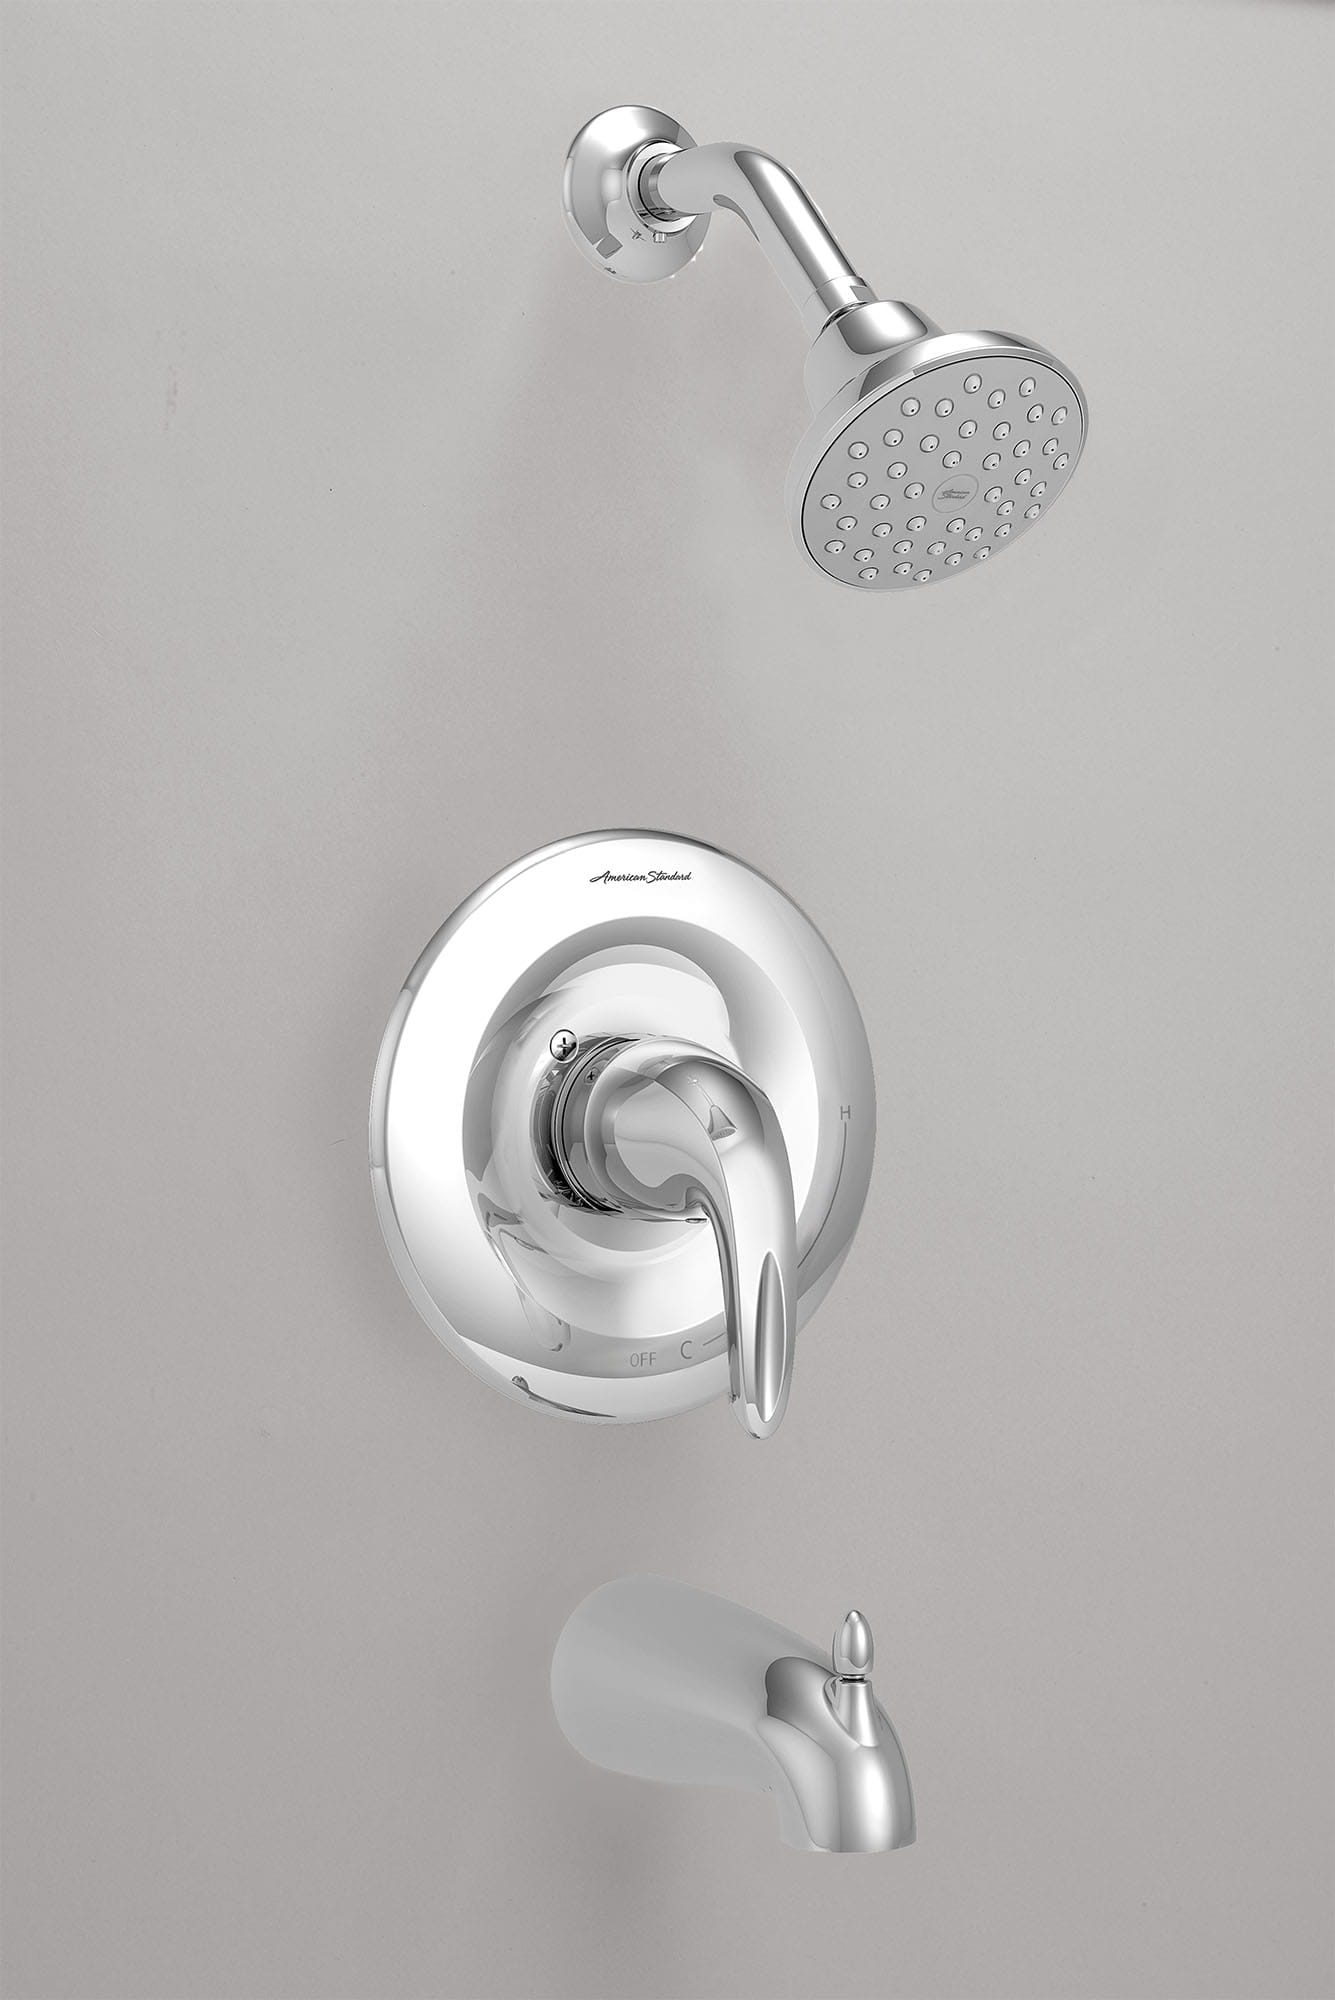 Reliant 3 175 gpm 66 L min Tub and Shower Trim Kit With Double Ceramic Pressure Balance Cartridge With Lever Handle CHROME